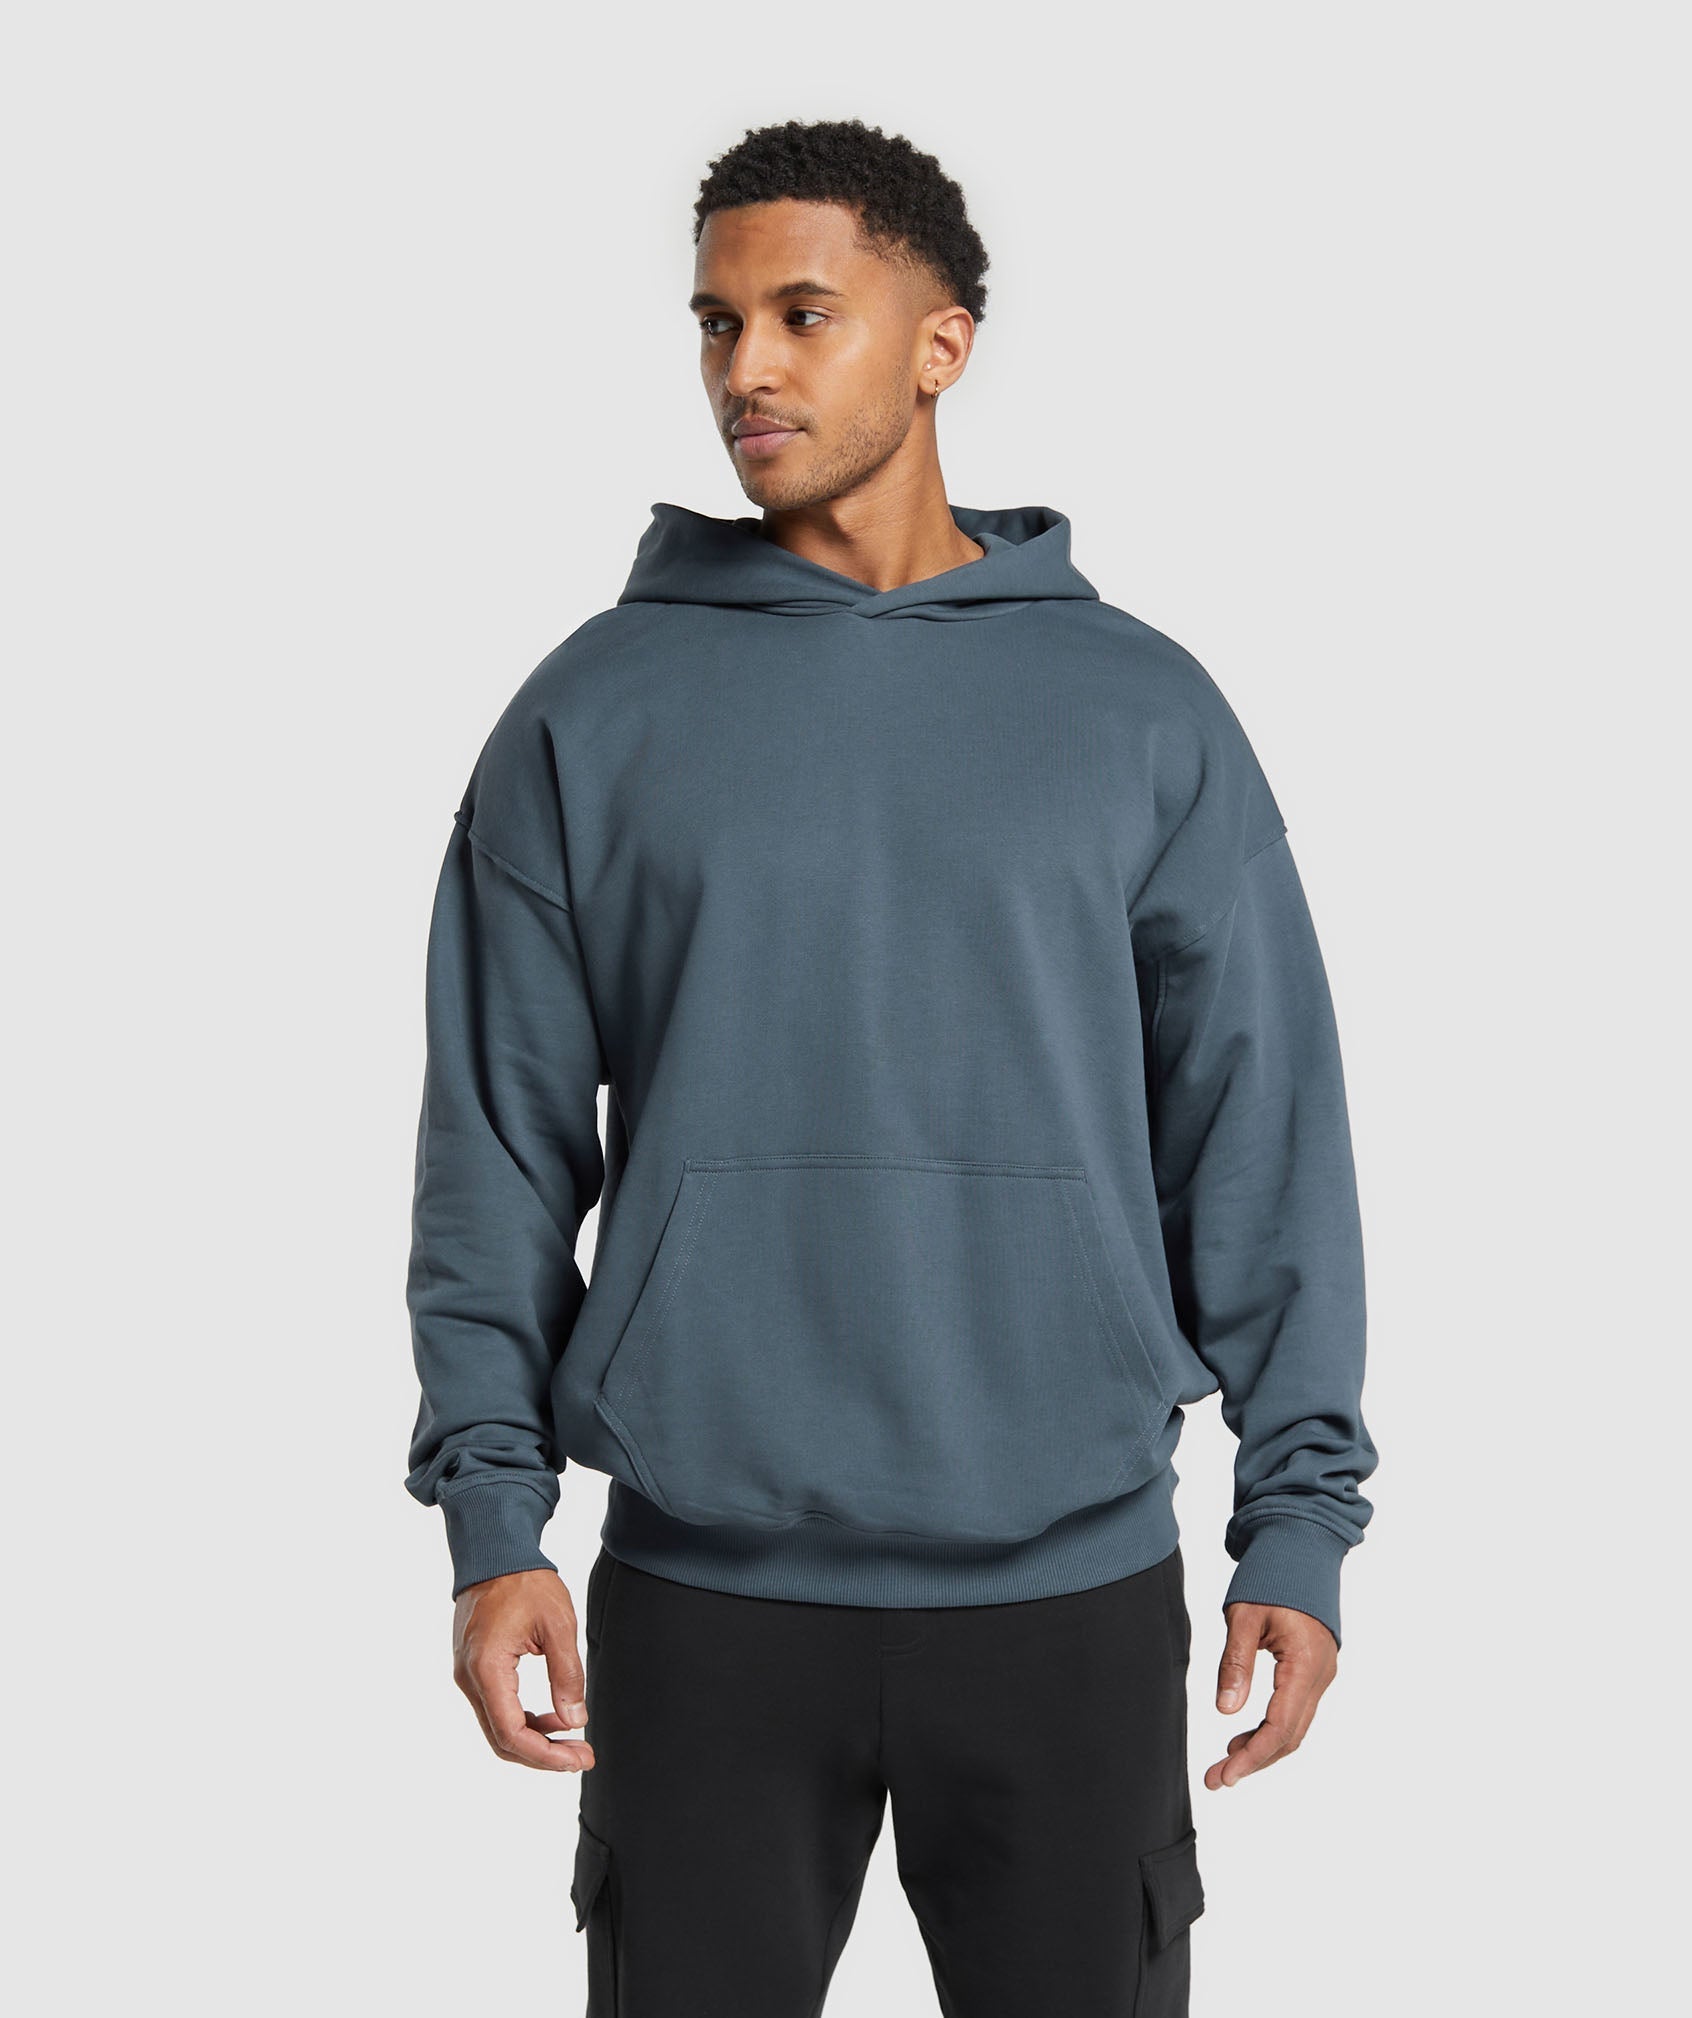 Rest Day Essentials Hoodie in Titanium Blue is out of stock